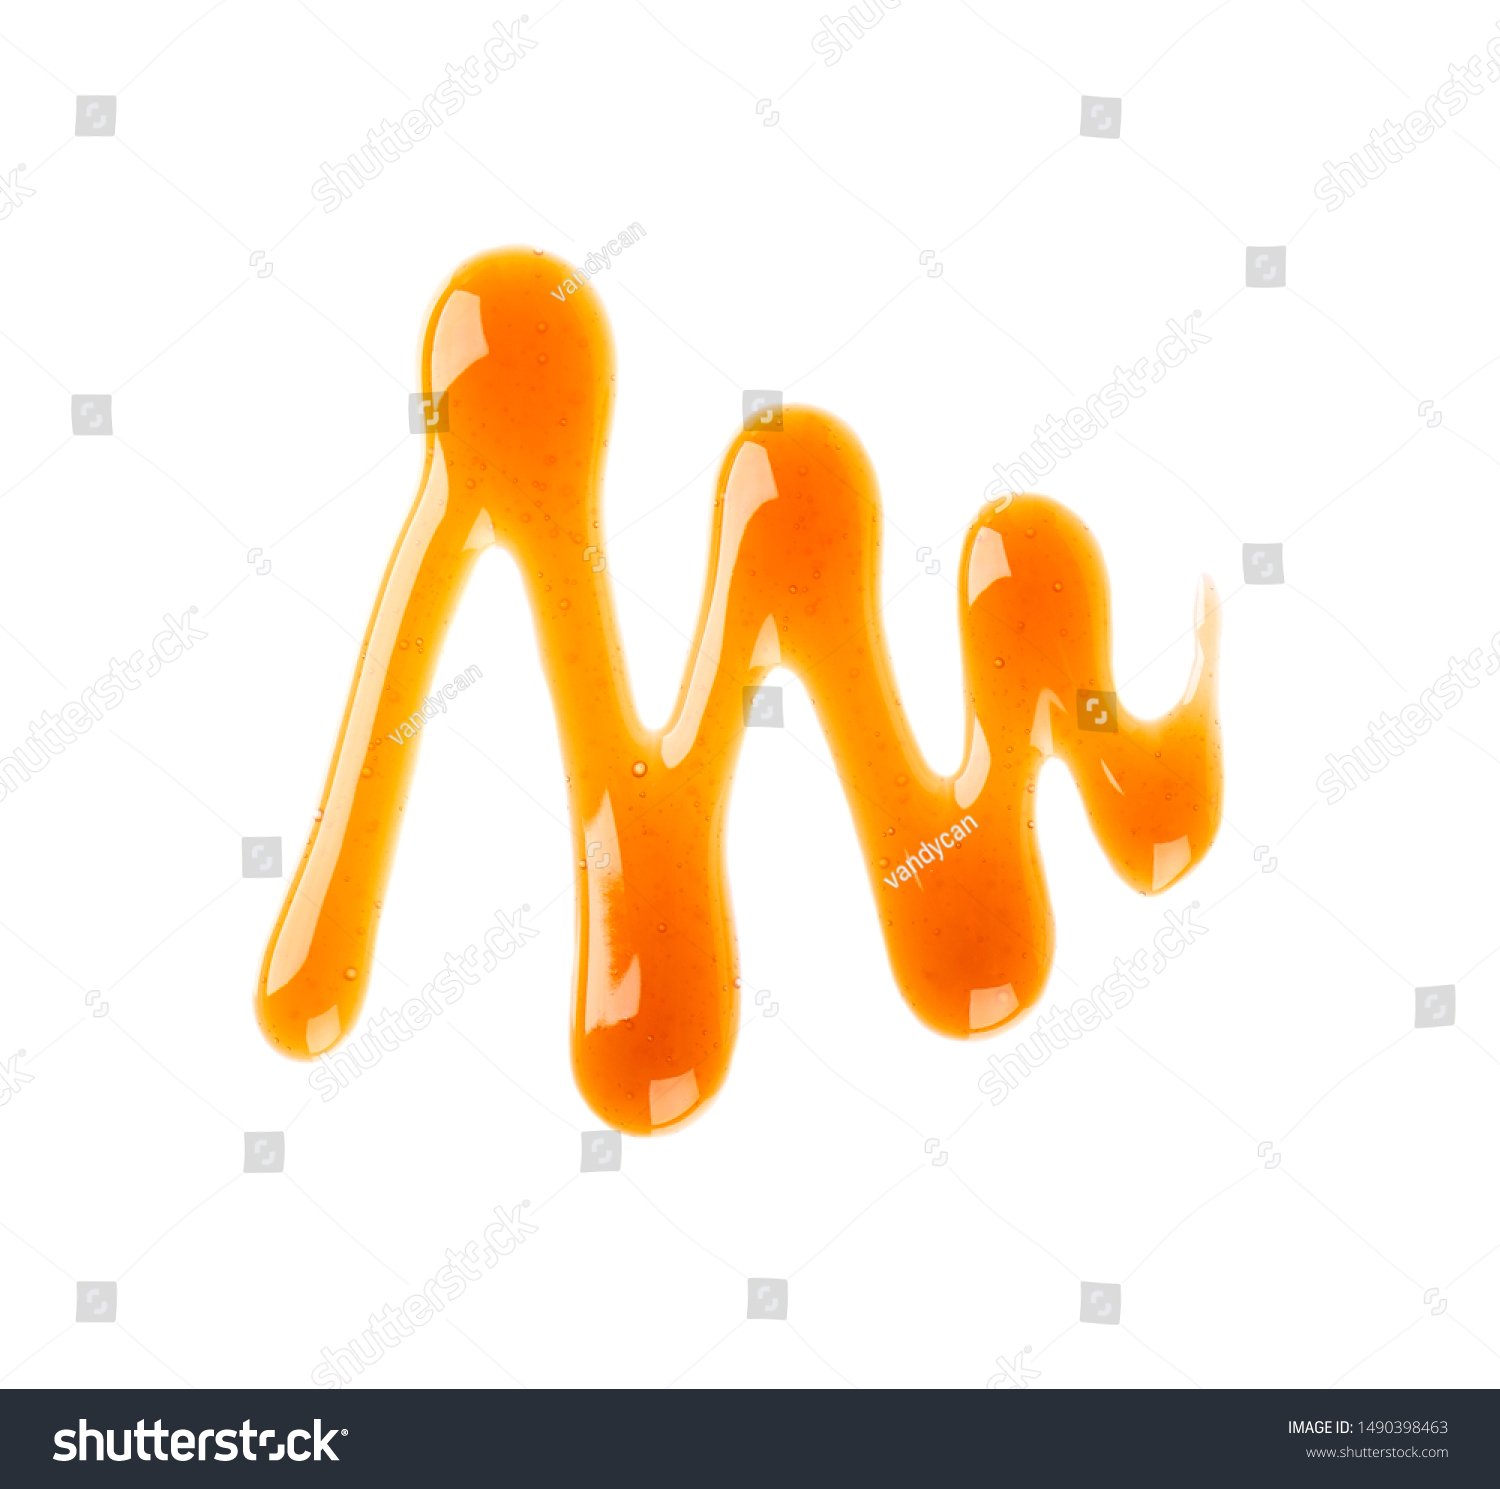 Caramel syrup drizzle isolated on white background. Splashes of sweet caramel sauce. Top view. #1490398463